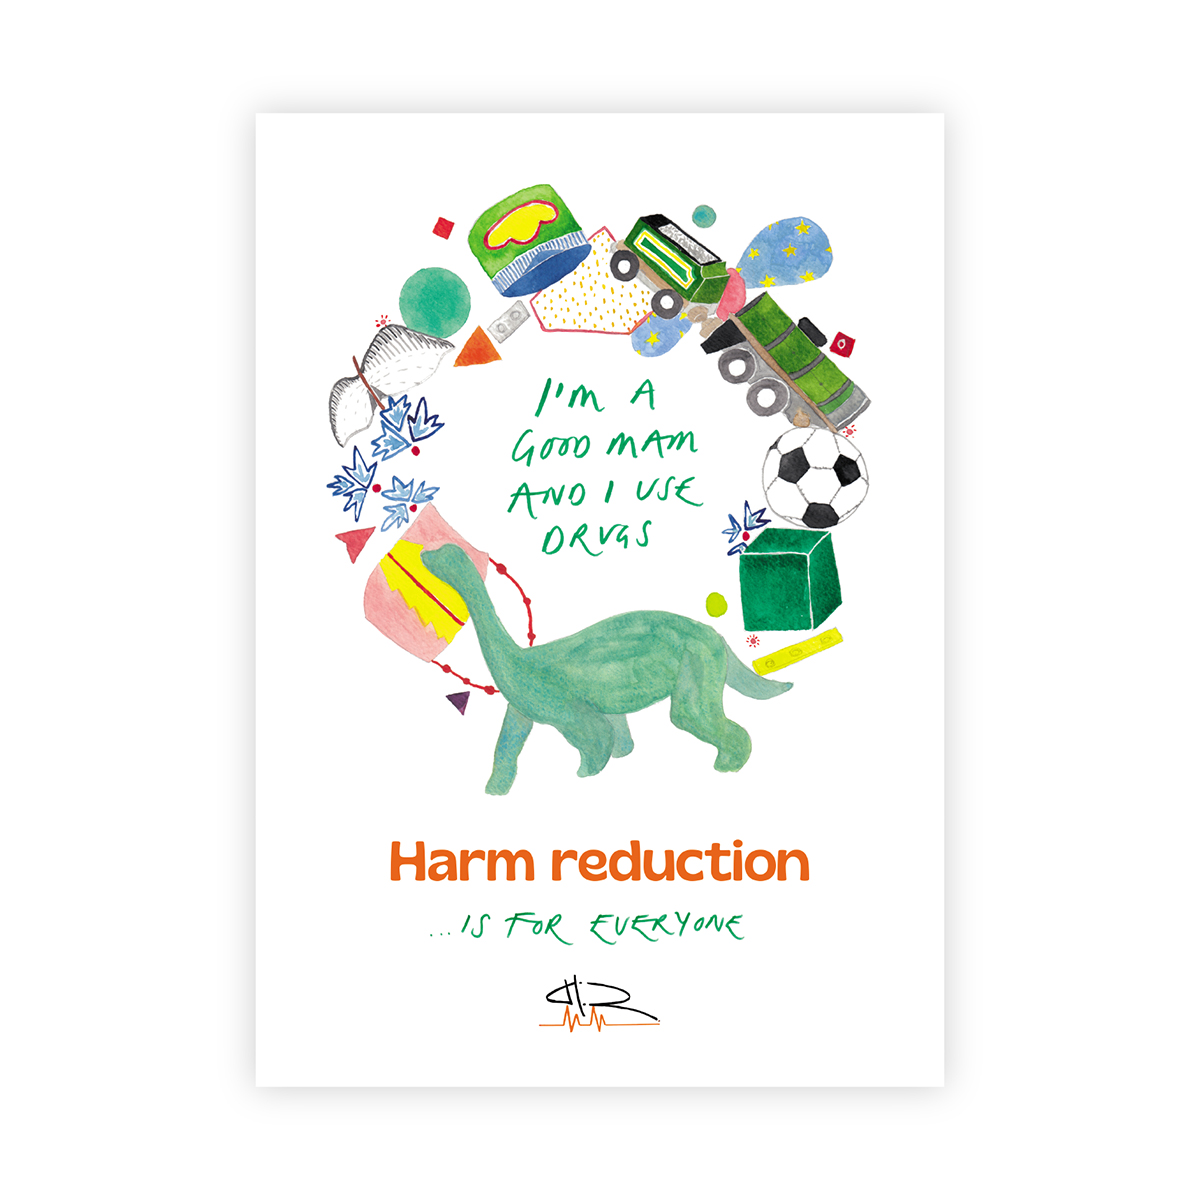 I'm a good mam... harm reduction is for everyone  (Northern dialect edition) green